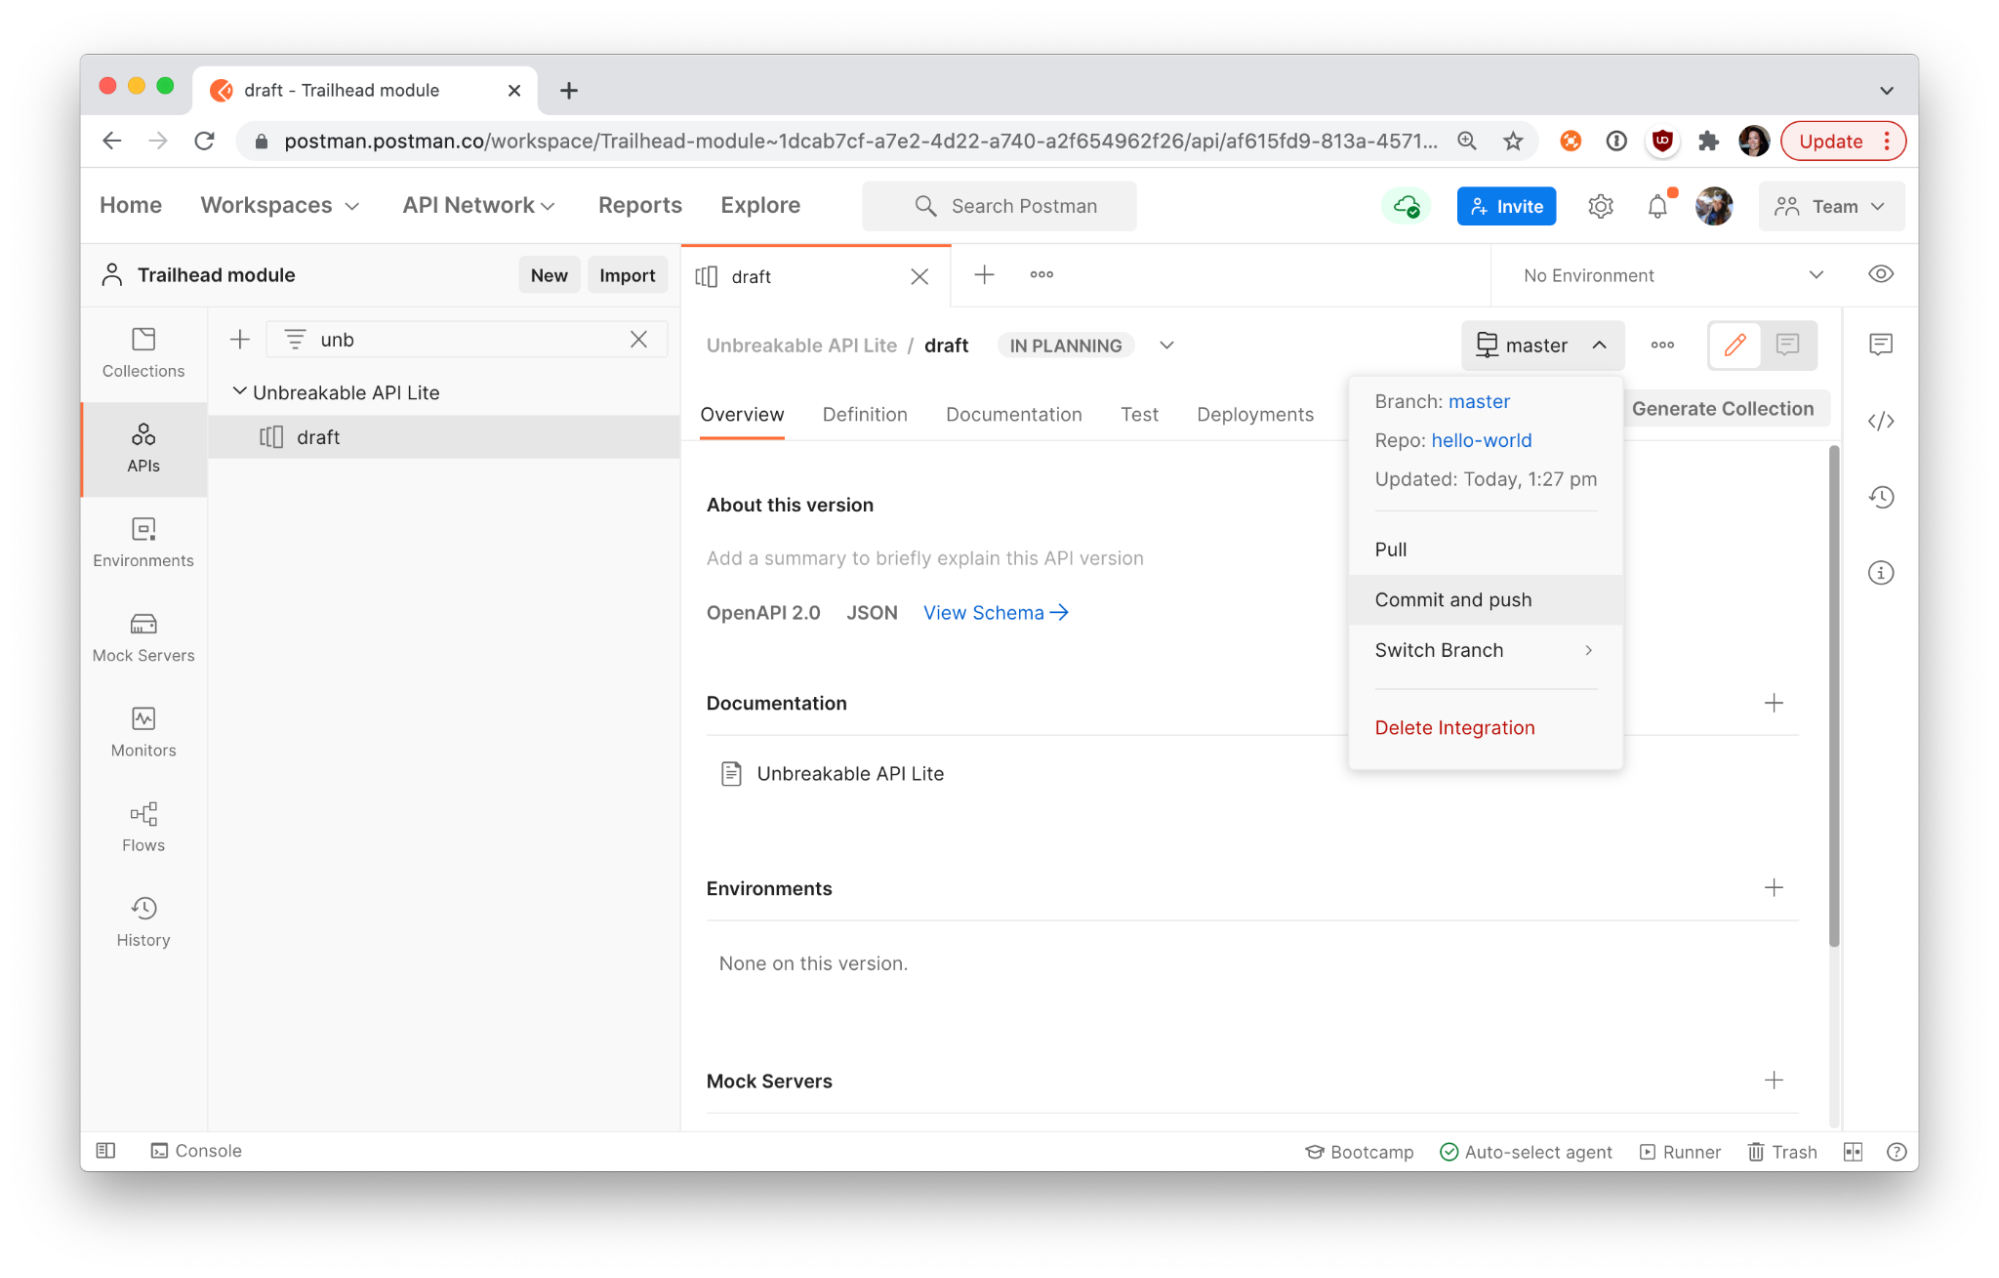 Git features for API management in Postman